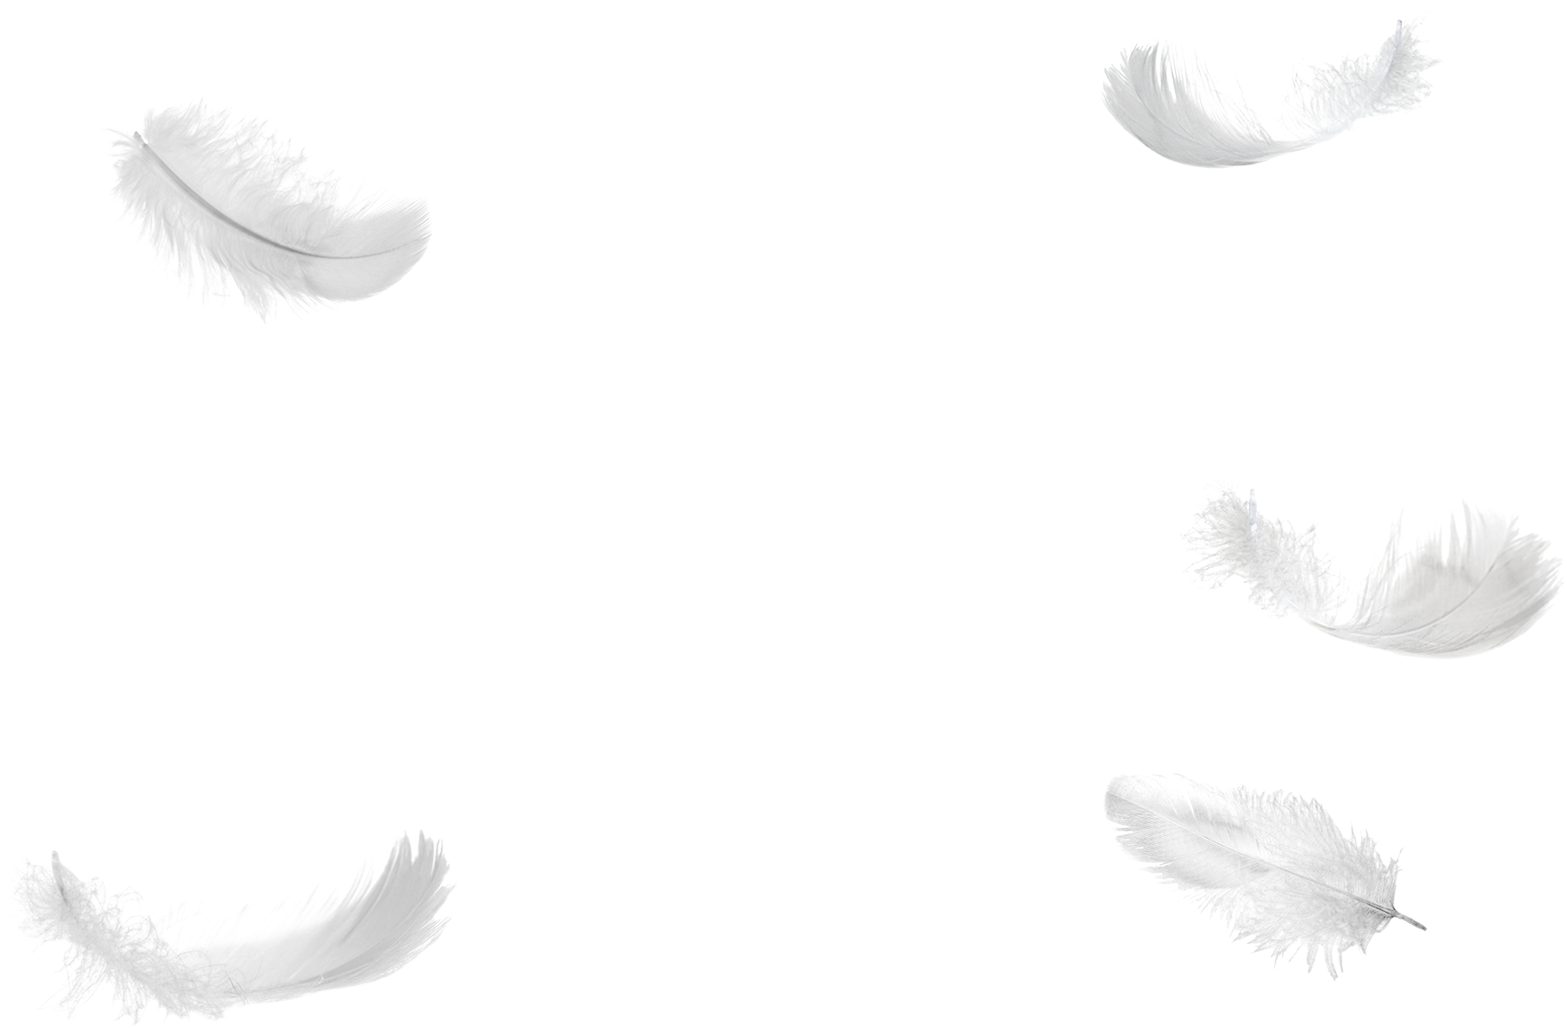 1495816576five Feathers Falling No Background Png - Portable Network Graphics (1600x1200), Png Download